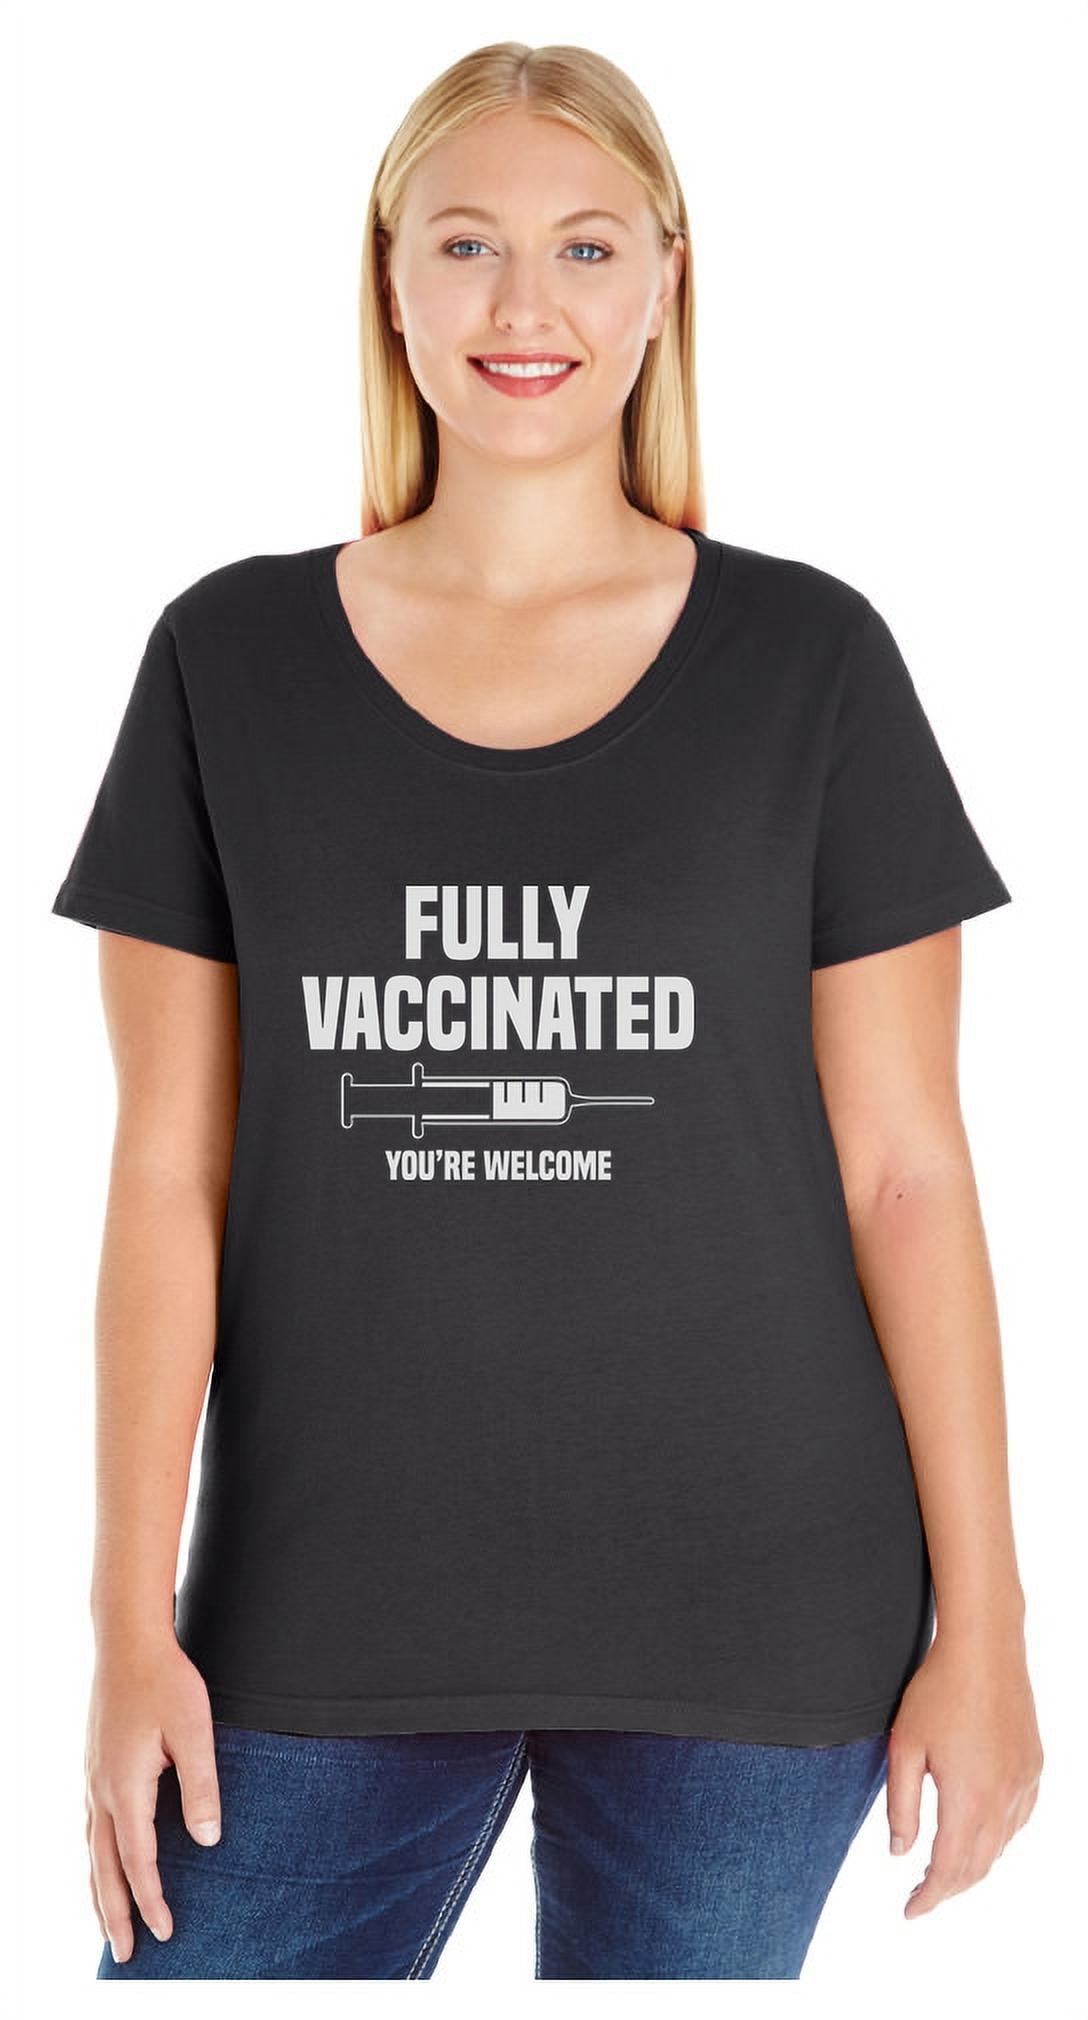 Vaccinated Shirt Covid Tee Pandemic Tee Vaccinate T Shirt Social Distance Gift Immunity T-Shirt Vaccine TShirt Covid Vaccine Clothing